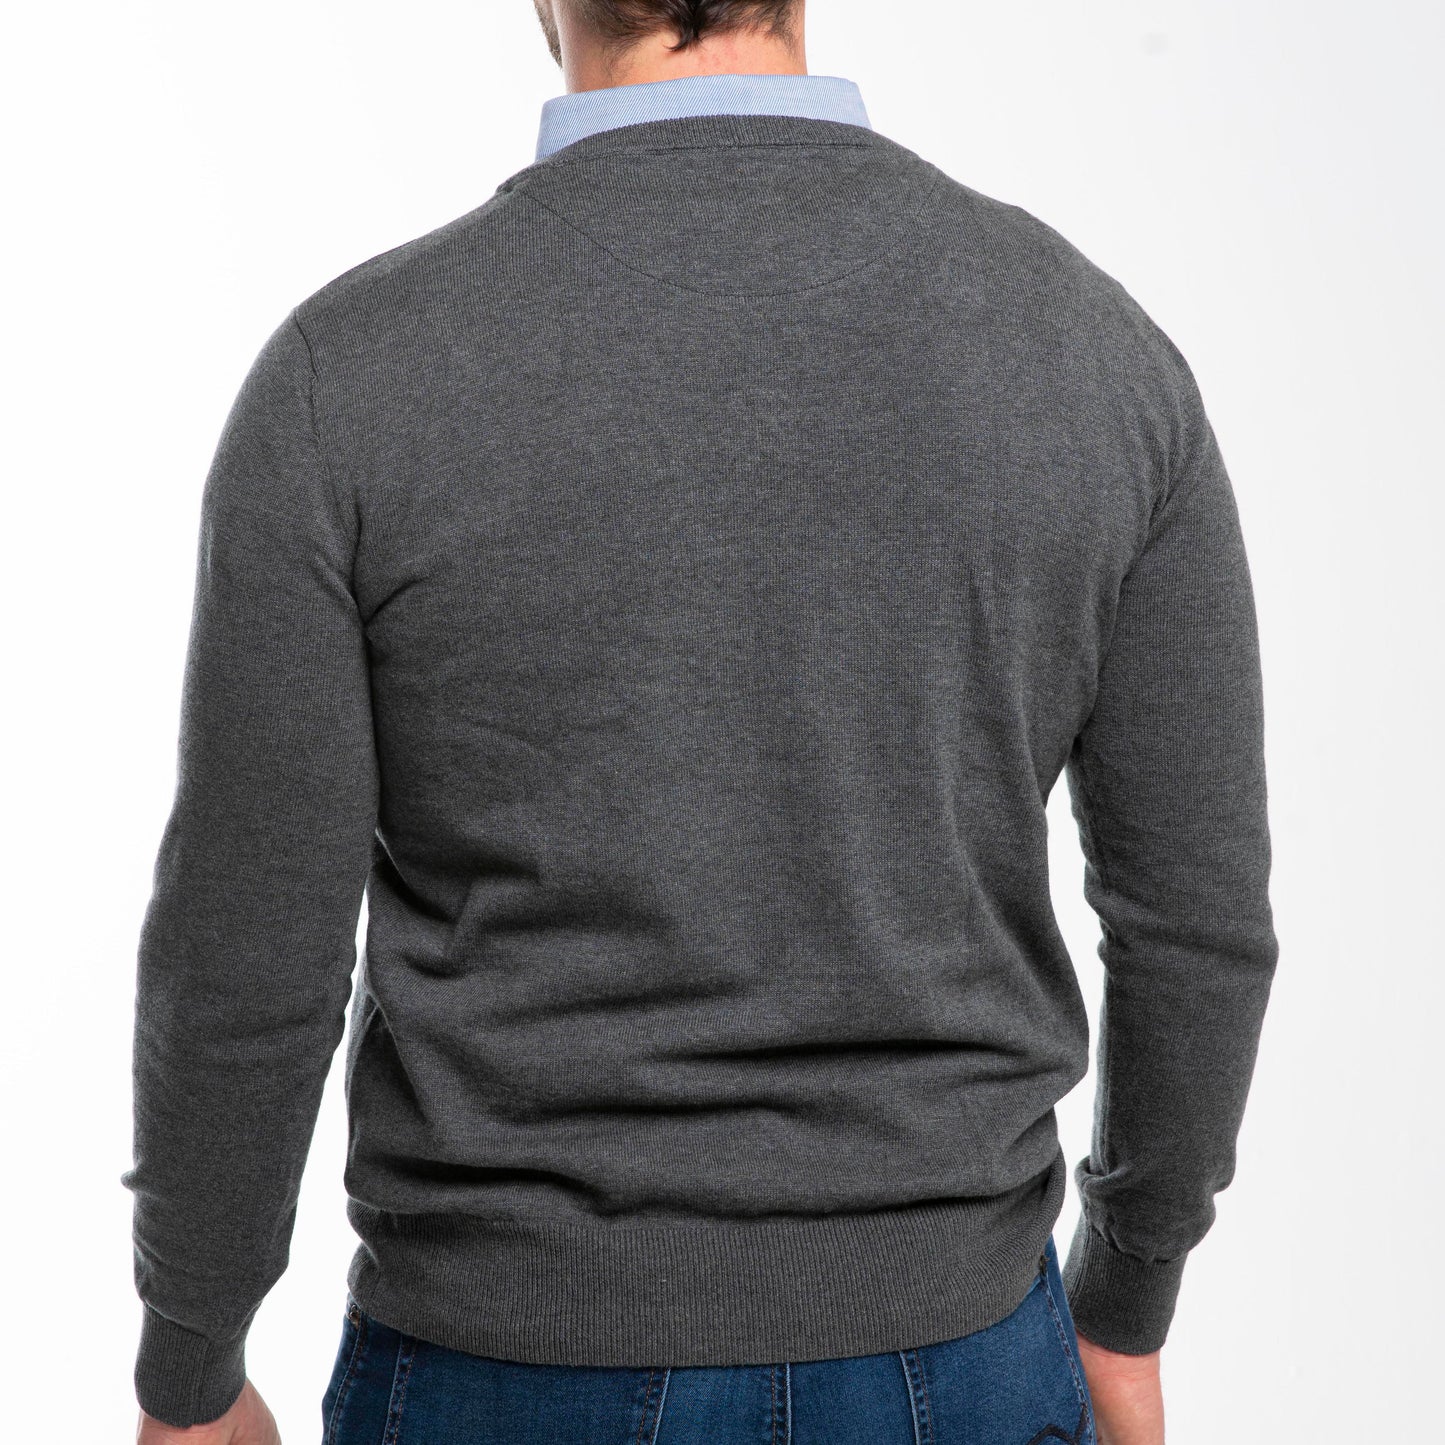 Grey Sweater with Blue Collar